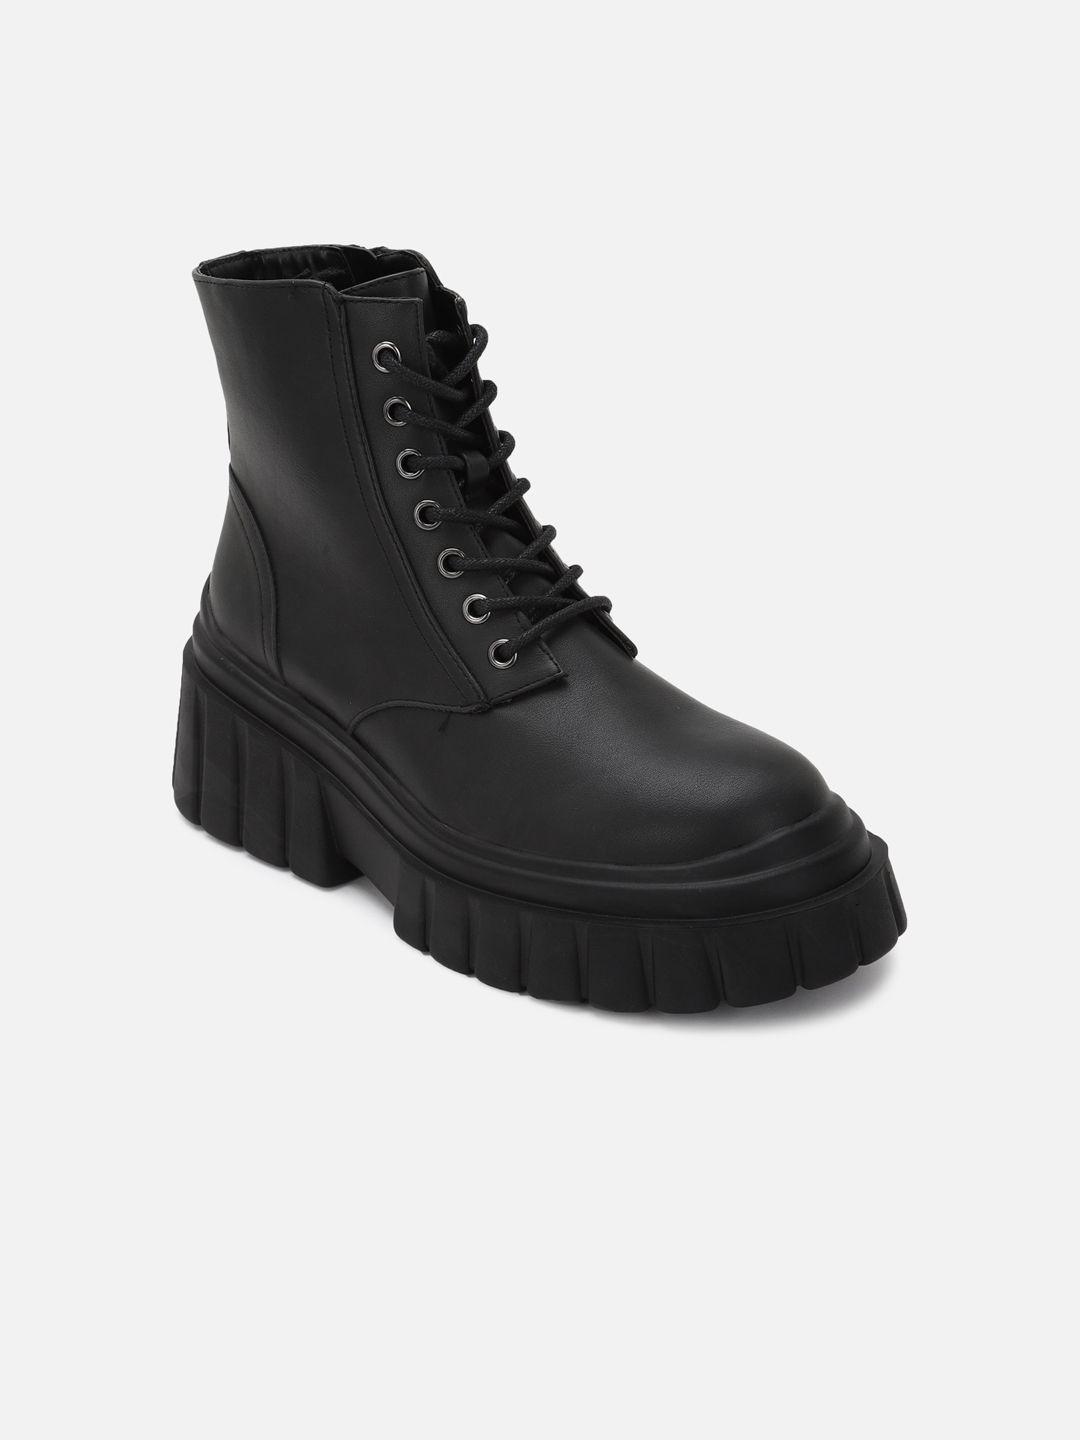 forever-21-women-mid-top-chunky-boots